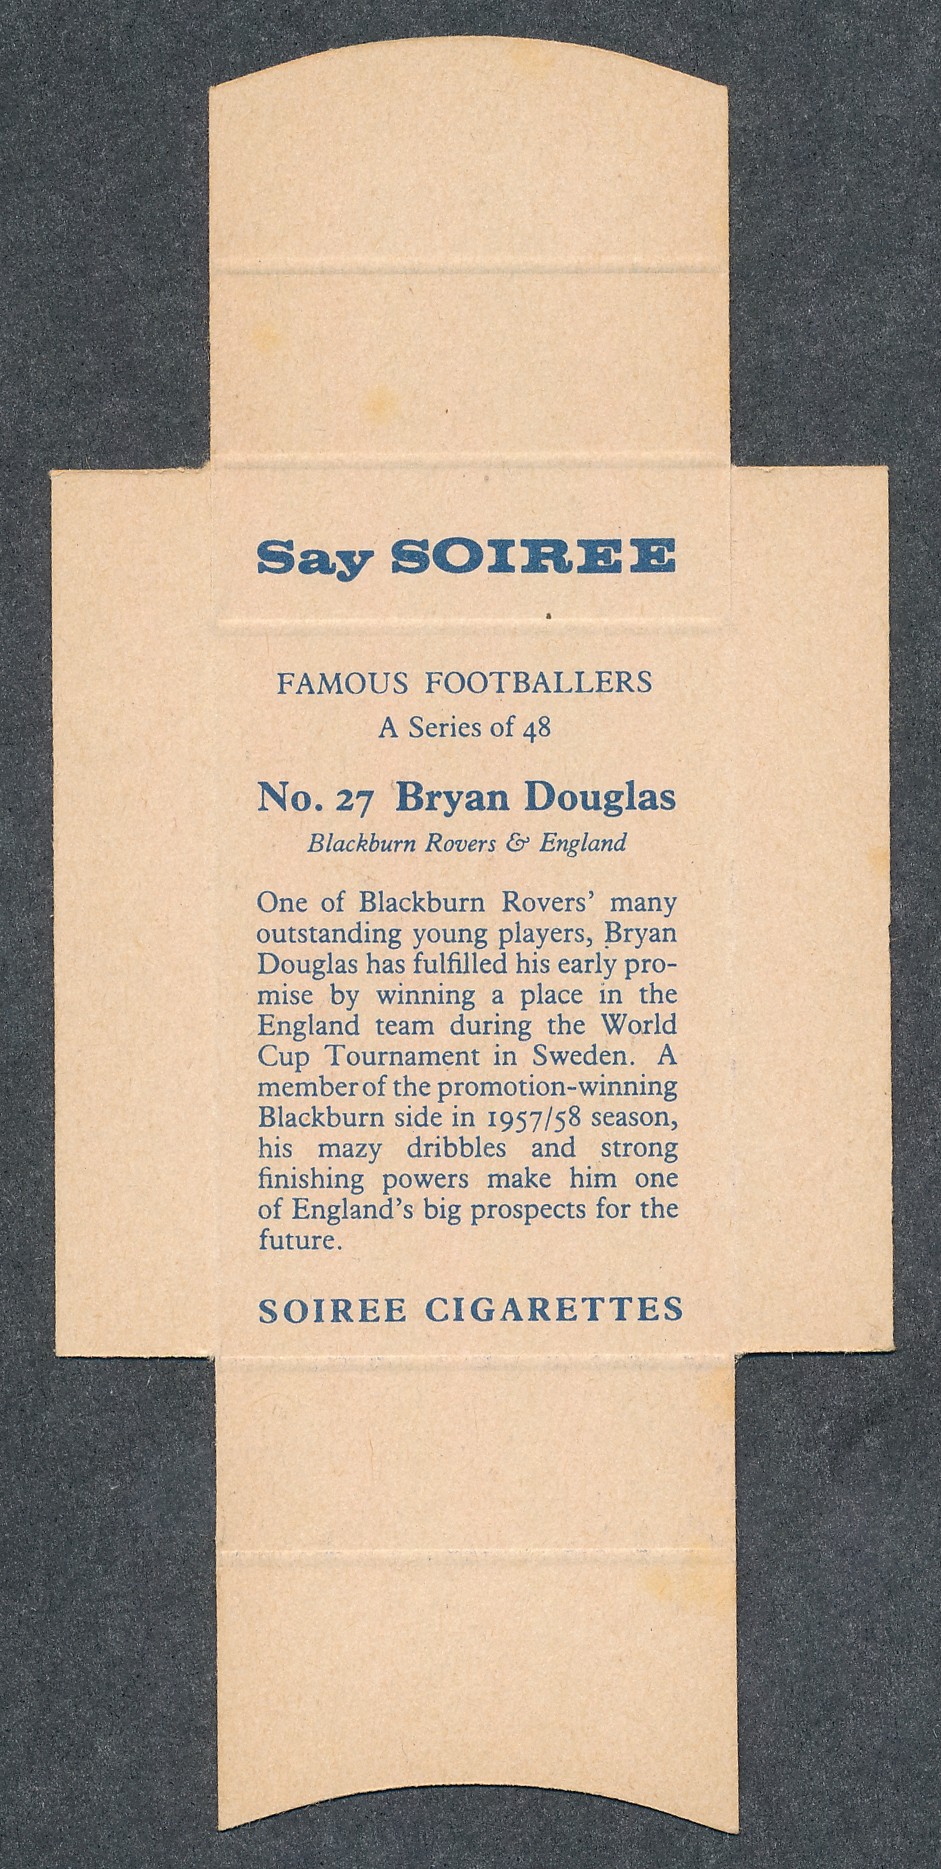 Soiree Cigarettes, Mauritius, Famous Footballers uncut packet issue, No.27 Bryan Douglas, - Image 2 of 2